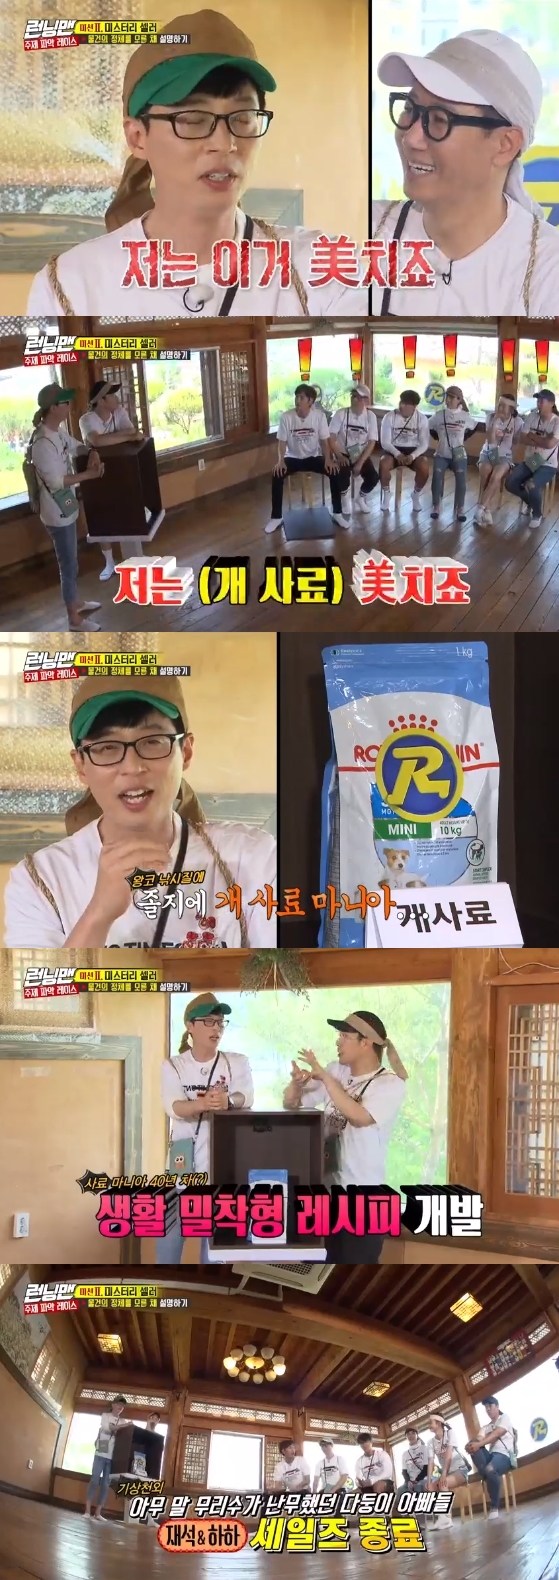 The comedian Yoo Jae-Suk and singer Haha explained the dog food in the wrong way.Yoo Jae-Suk and Haha had to explain the identity of the dog feed in the SBS entertainment program Running Man broadcasted on the afternoon of the 15th.The members had time to explain without knowing the identity of the object, and Yoo Jae-Suk and Haha were given causal fees.Other members, except Yoo Jae-Suk and Haha, who were in charge of the explanation, knew that the item was a fee for the company.Yoo Jae-Suk said, I am crazy about this, I wake up when I think about this. In addition, Haha said, Do you know why I am prolific?,My wife is trying to hide this, he said, laughing at the wrong explanation.Lee Kwang-soo asked, How do you usually use this? Yoo Jae-Suk said, I enjoy it, but even if I use my first taste, it is getting hotter.Furthermore, Haha laughed, saying, It was delicious to make it into a rice bowl or to eat it in milk.